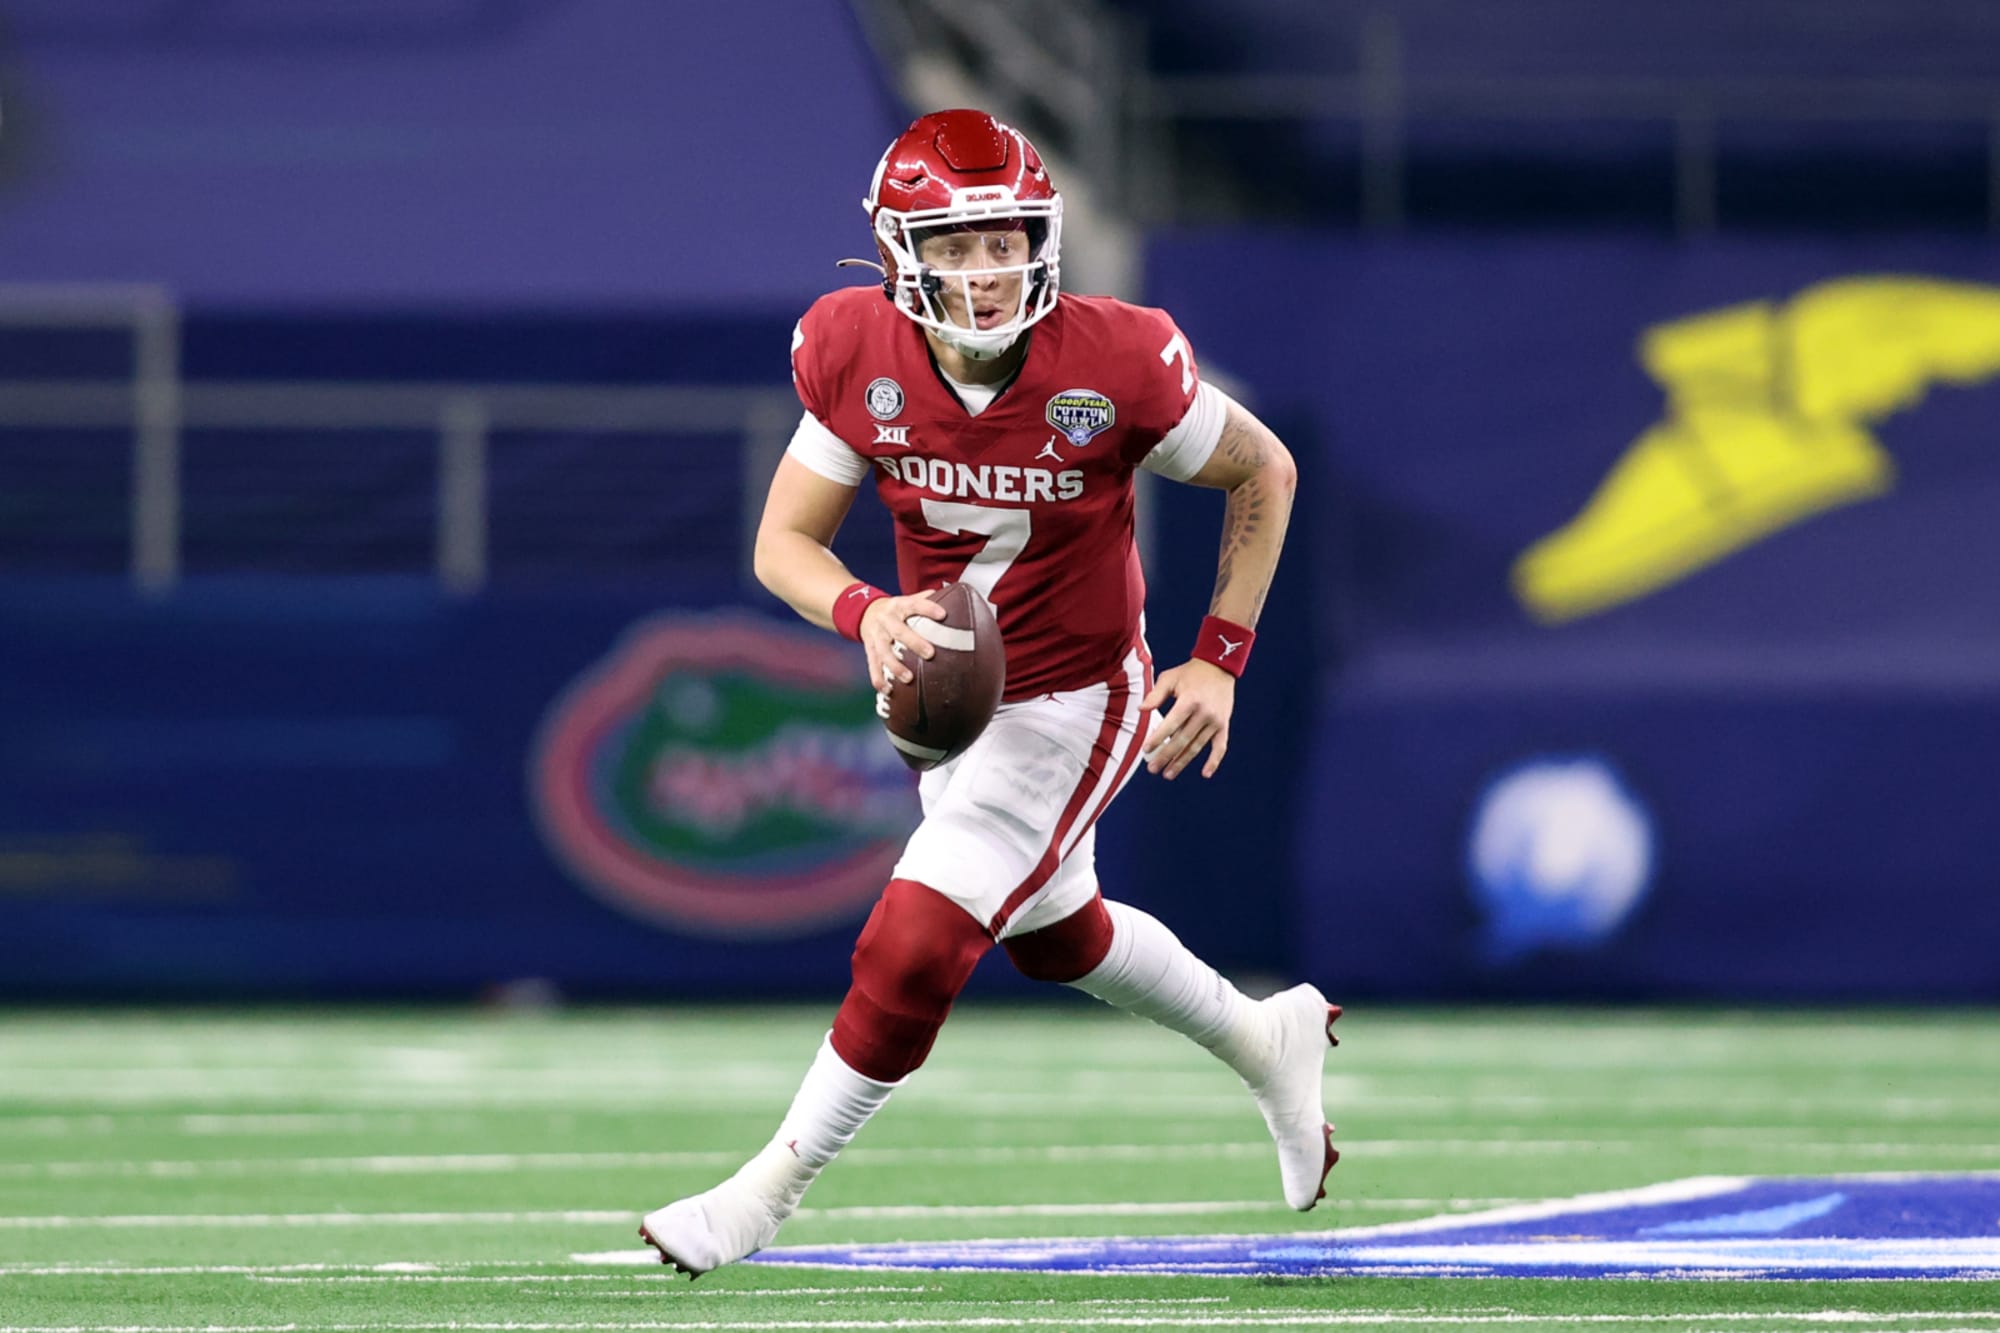 2022 NFL mock draft: Kayvon Thibodeaux is No. 1, but don't ignore the  quarterbacks - DraftKings Network